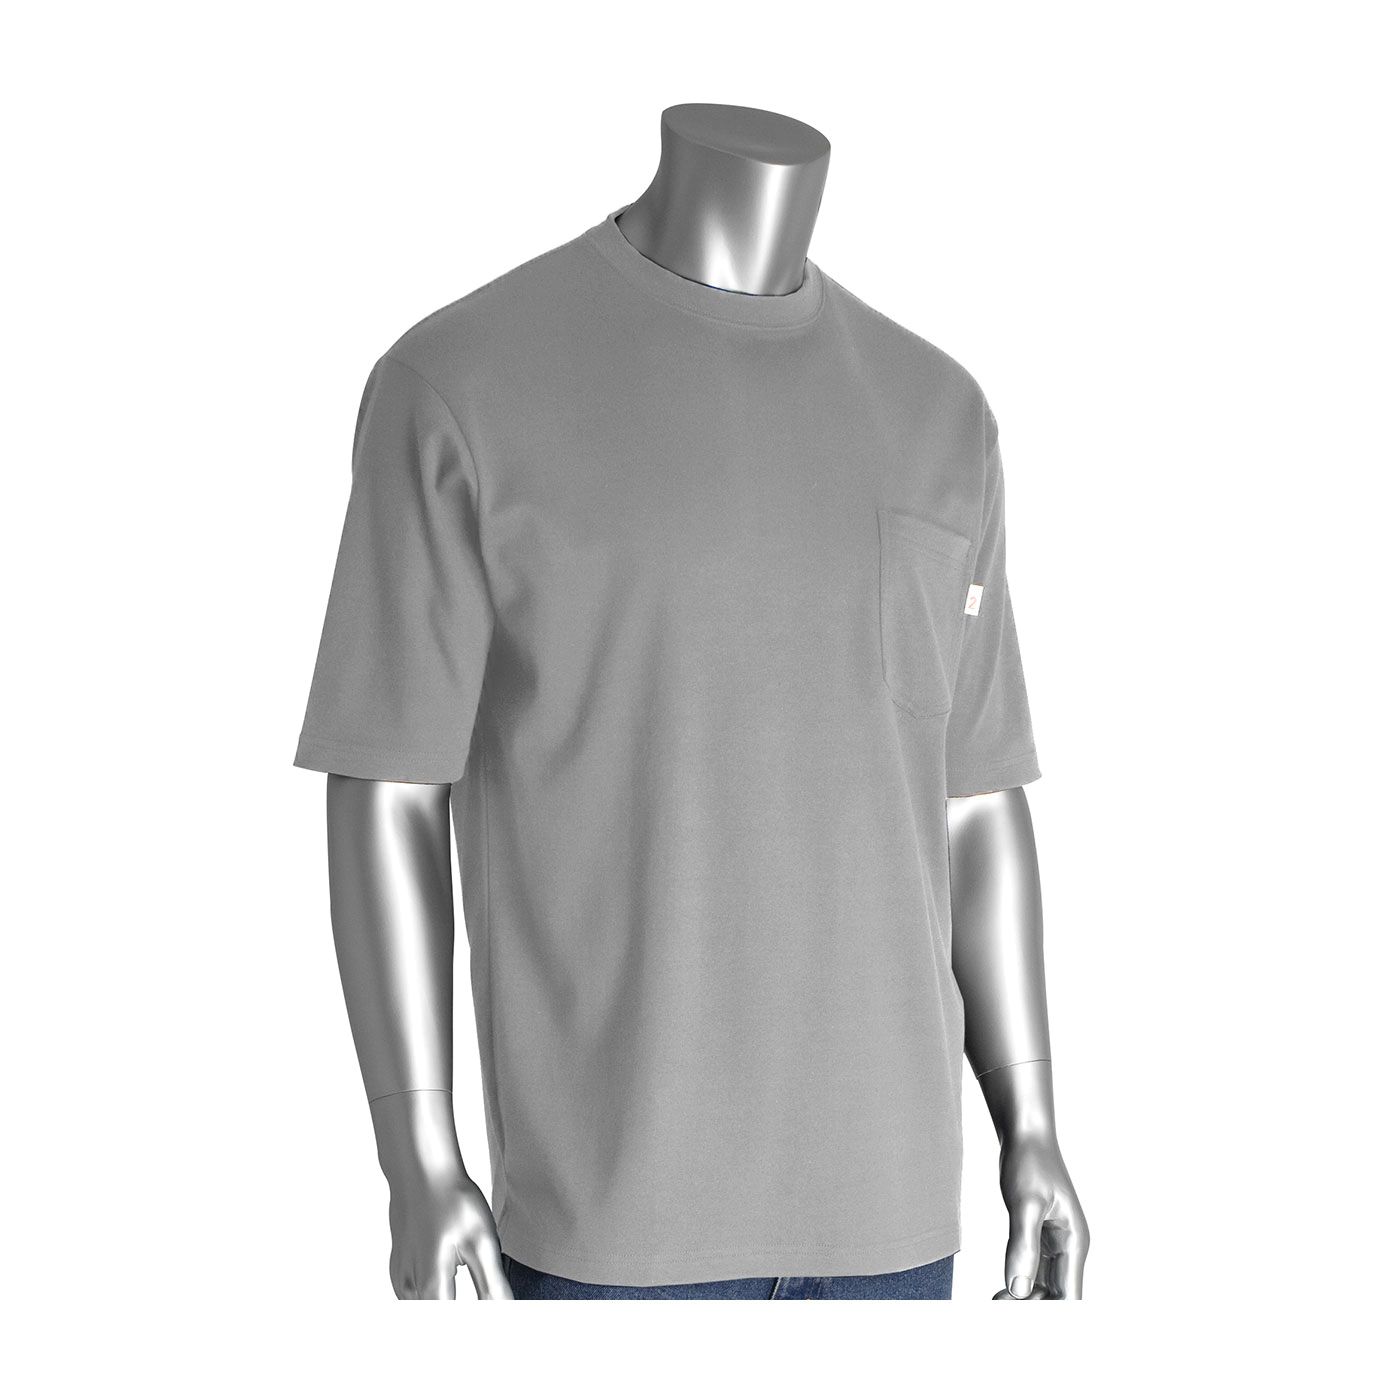 PIP® 385-FRSS-LG/L Arc and Flame-Resistant Short Sleeve T-Shirt, L, Light Gray, Cotton Interlock Knit, 31 in L